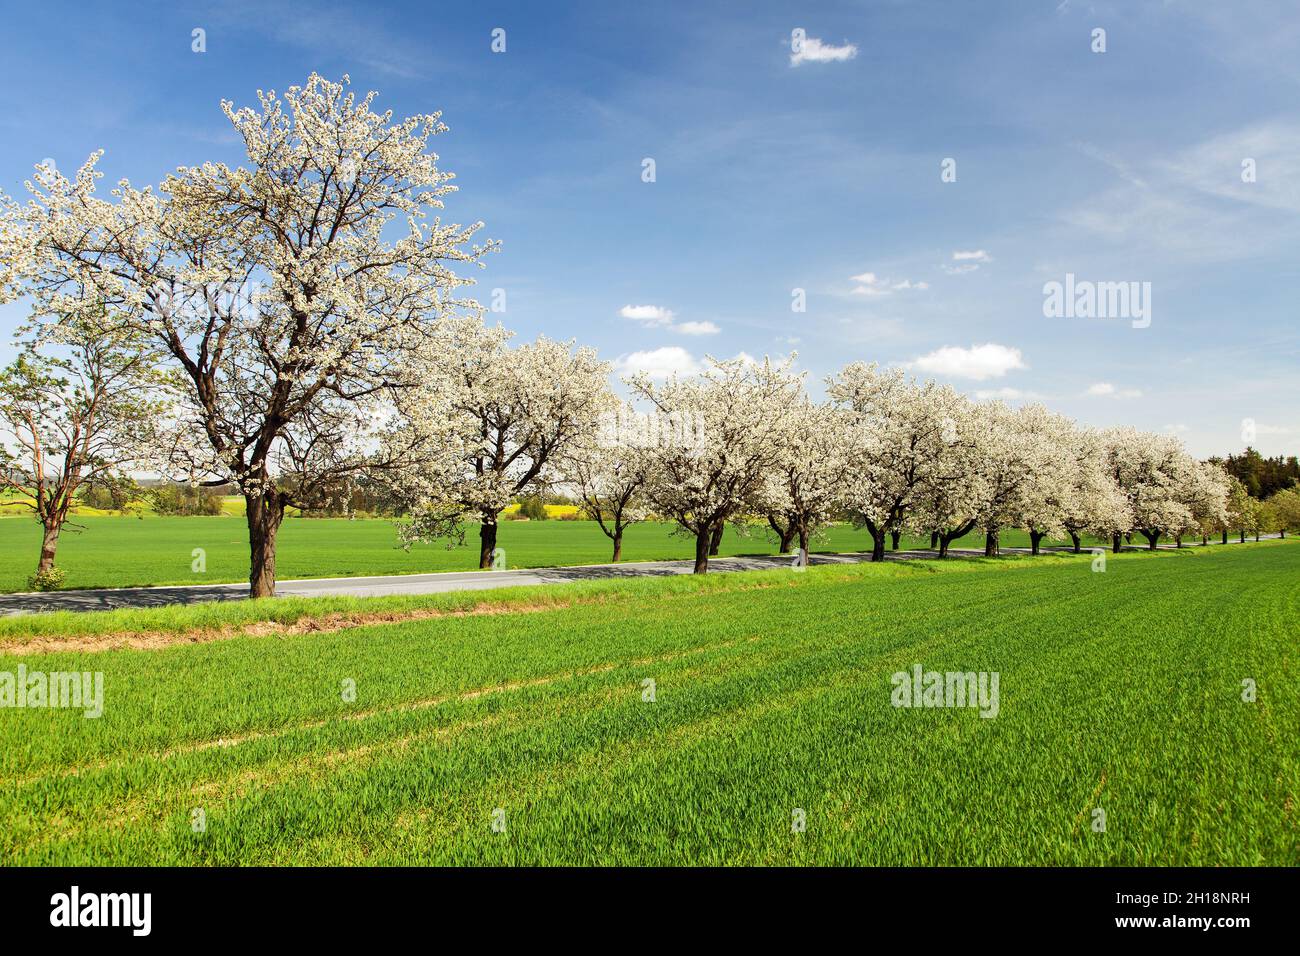 road and alley of flowering cherry trees in latin Prunus cerasus with beautiful sky. White colored flowering cherrytree Stock Photo